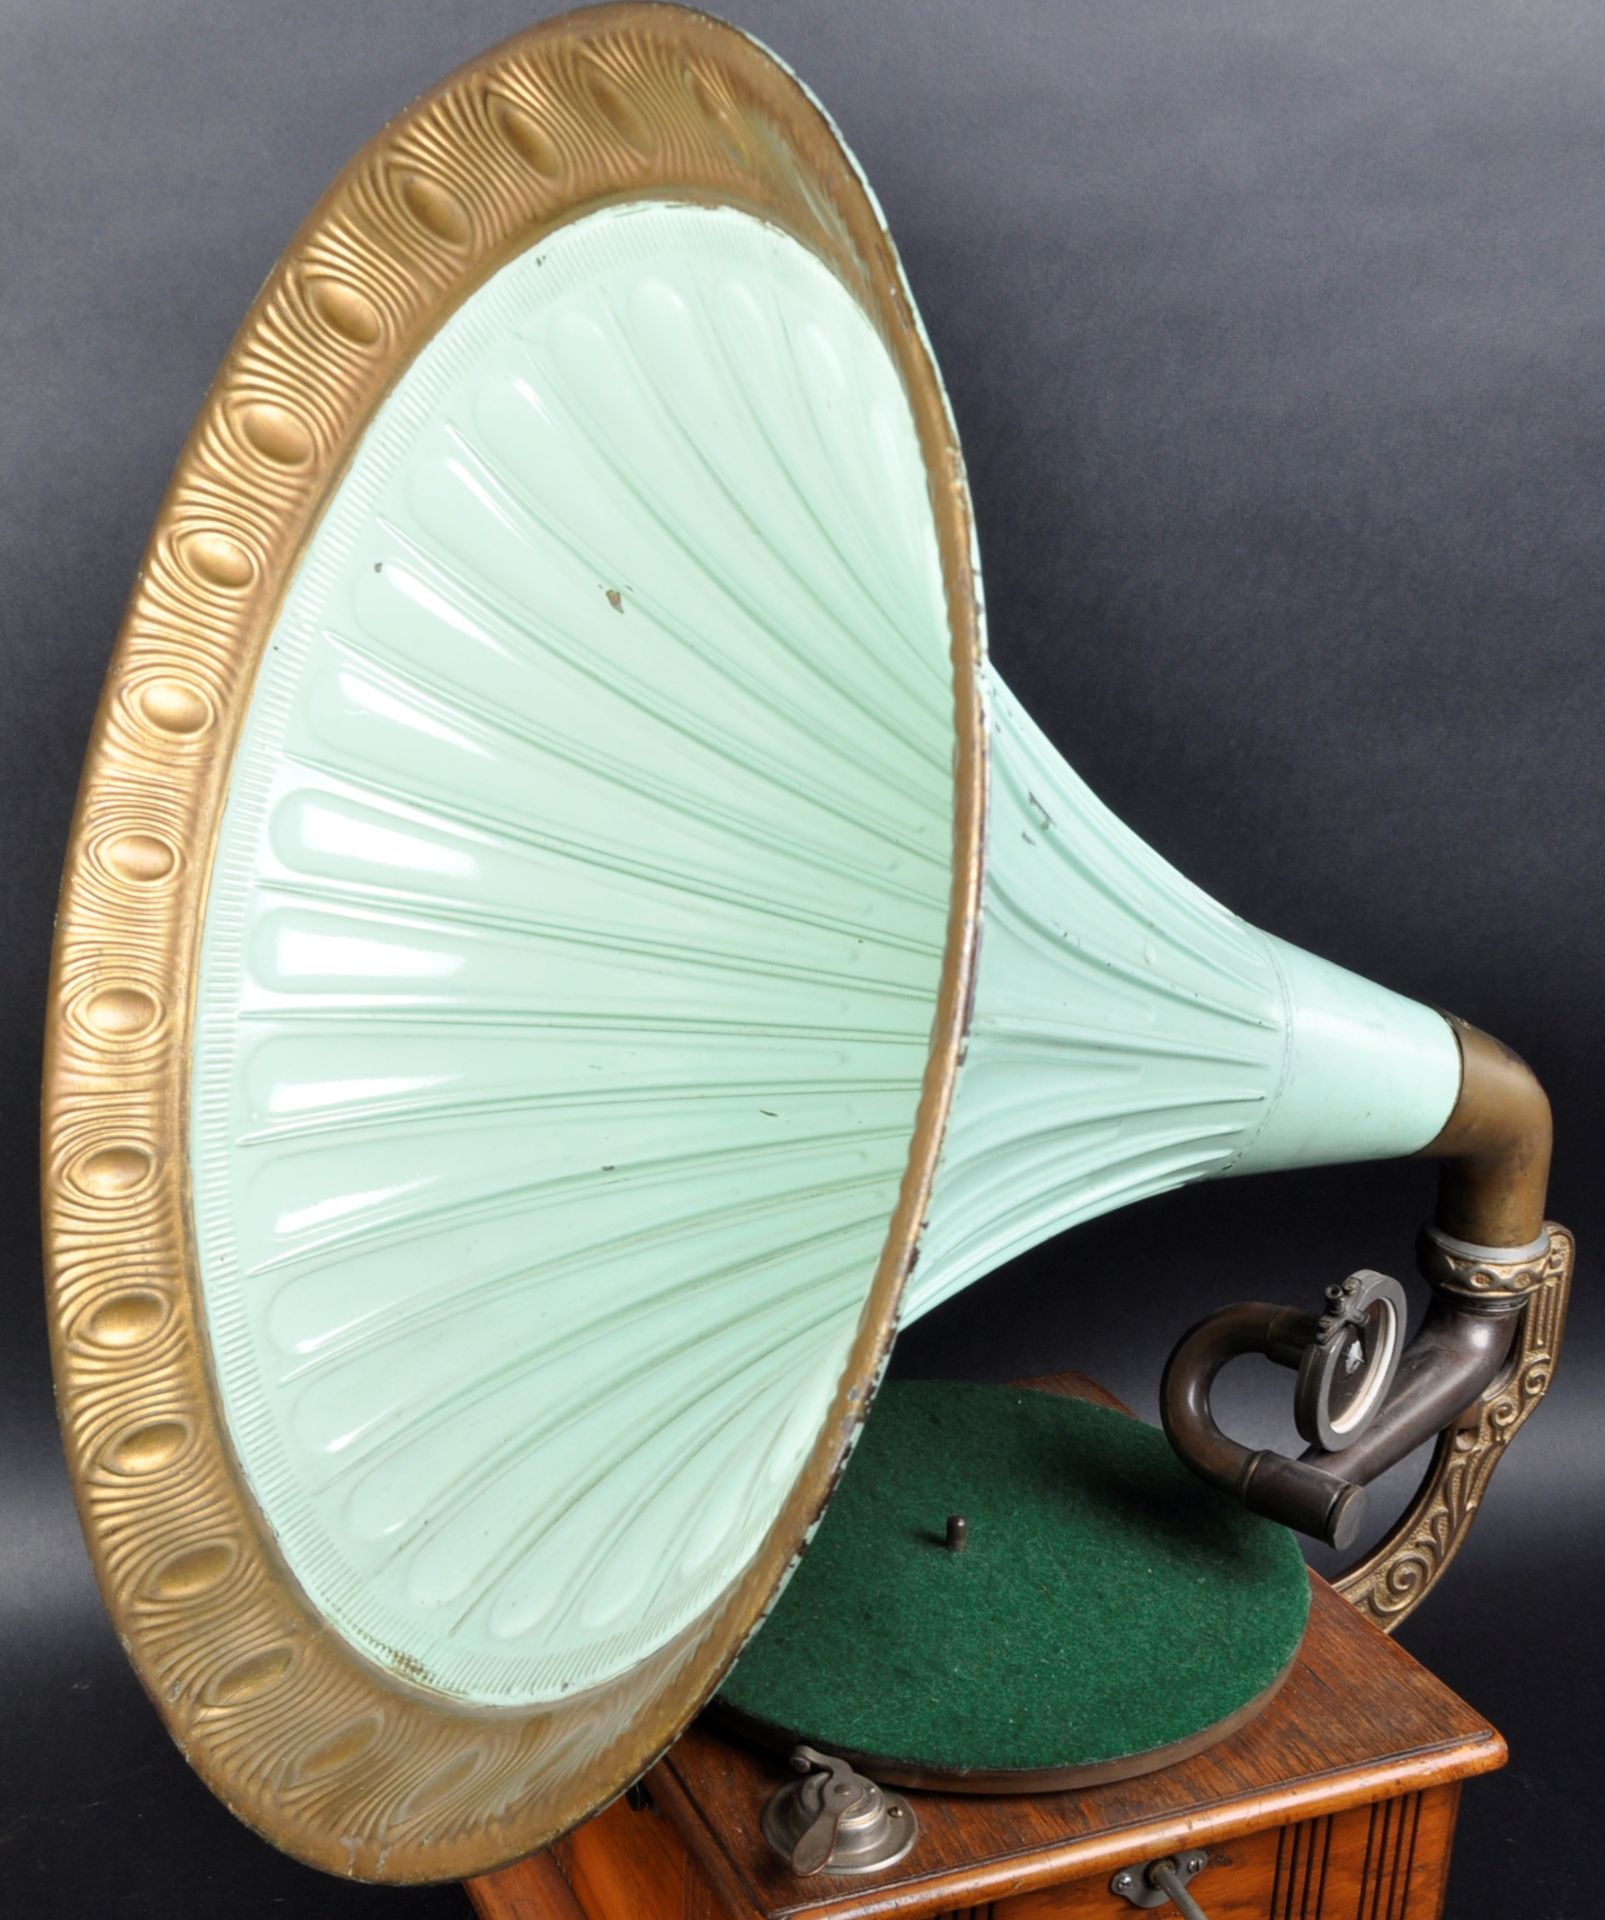 VINTAGE EARLY 20TH CENTURY GRAMOPHONE RECORD PLAYER - Image 2 of 7